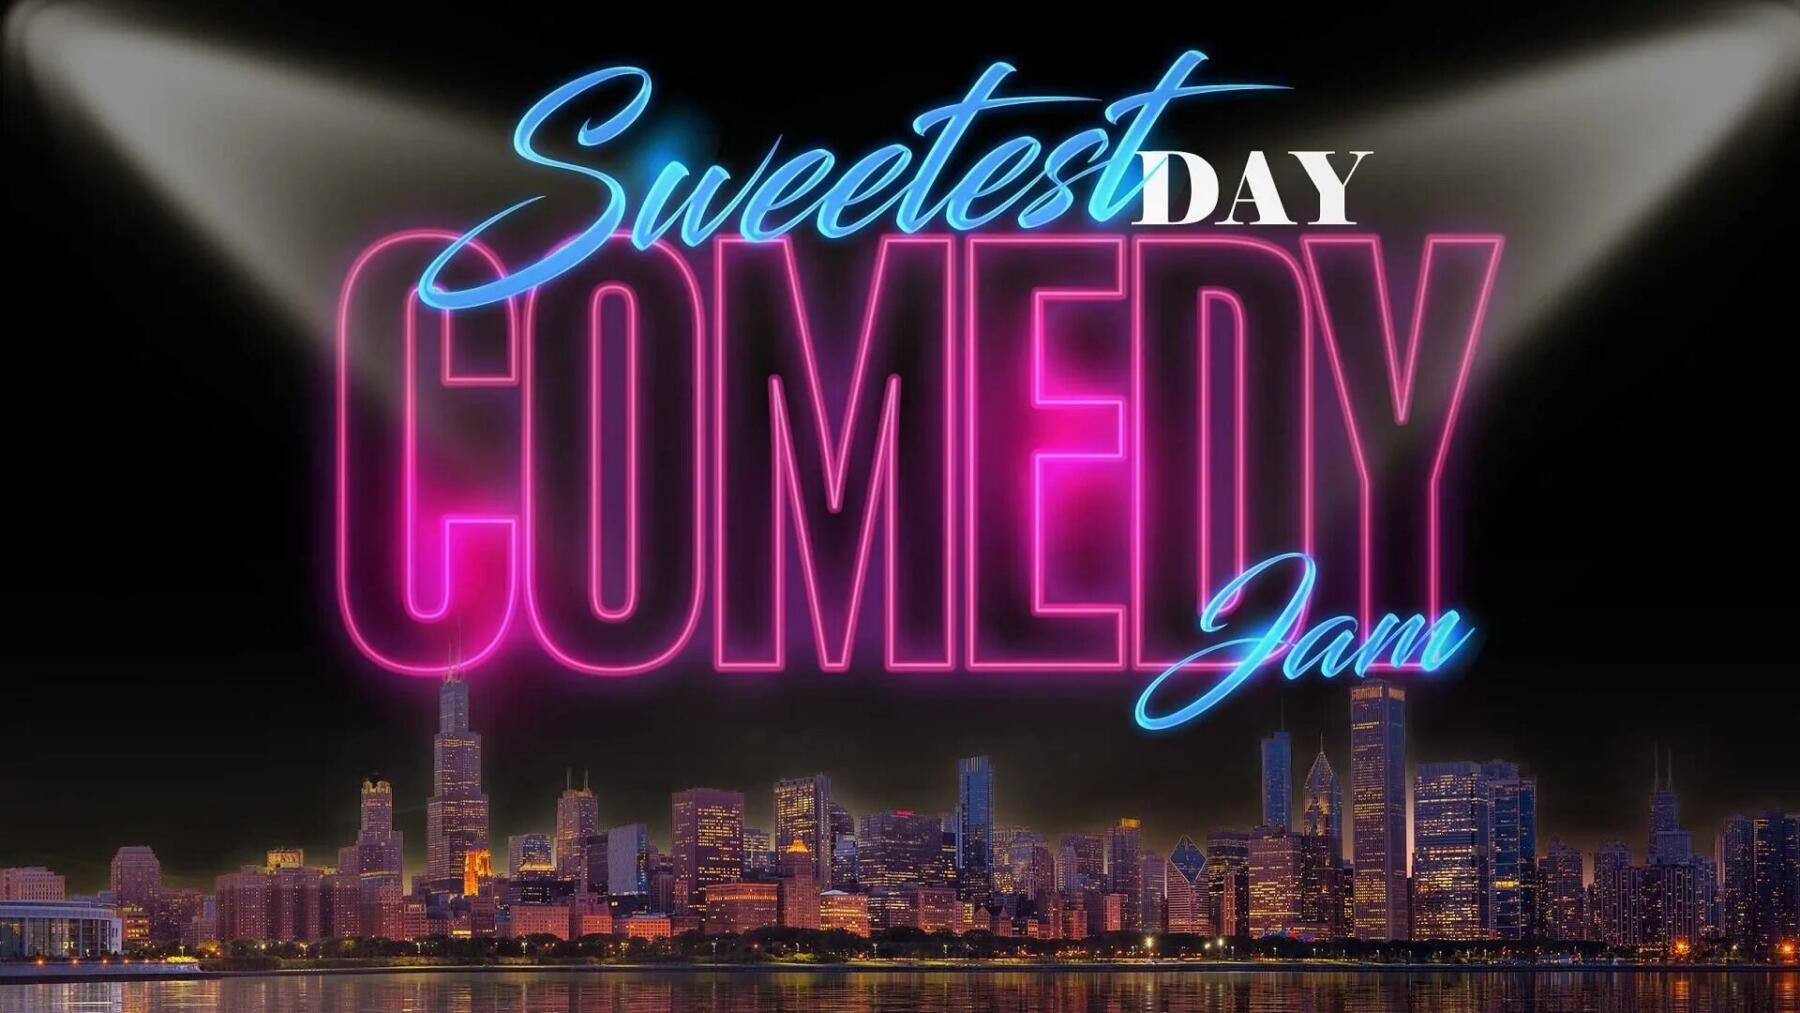 Sweetest Day Comedy Jam1